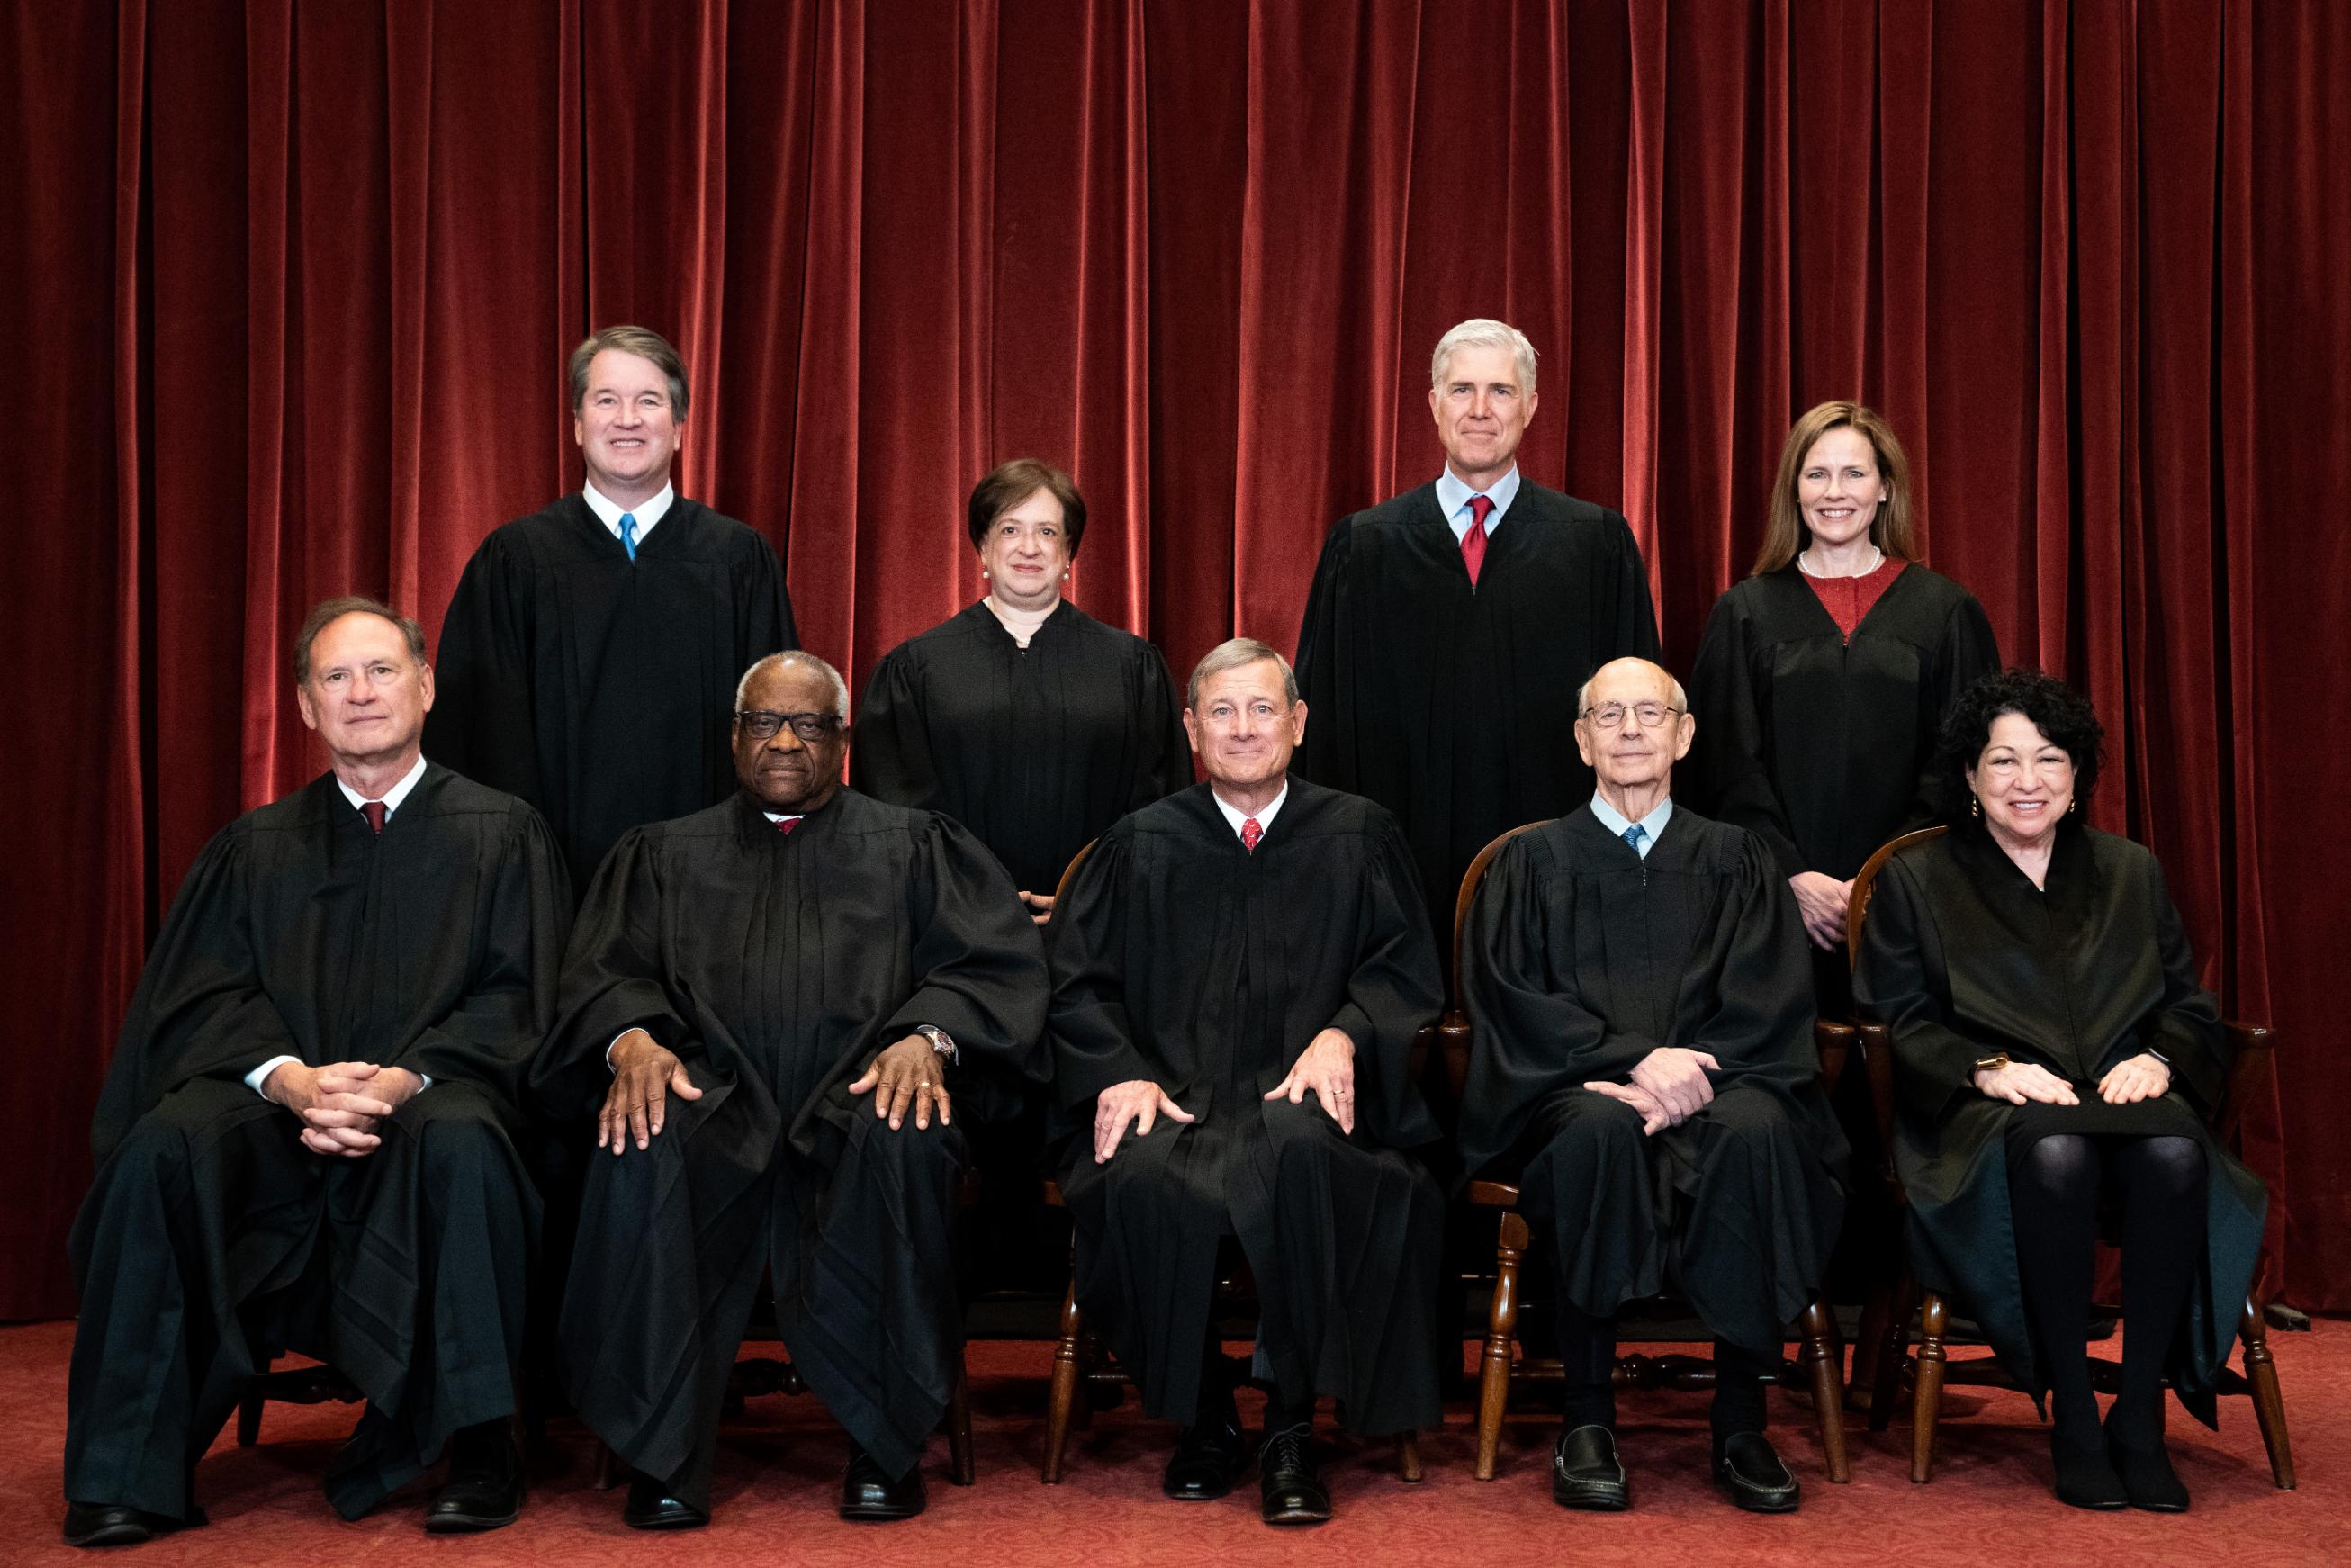 Members of the Supreme Court pose for a group photo in Washington, DC on April 23, 2021. 